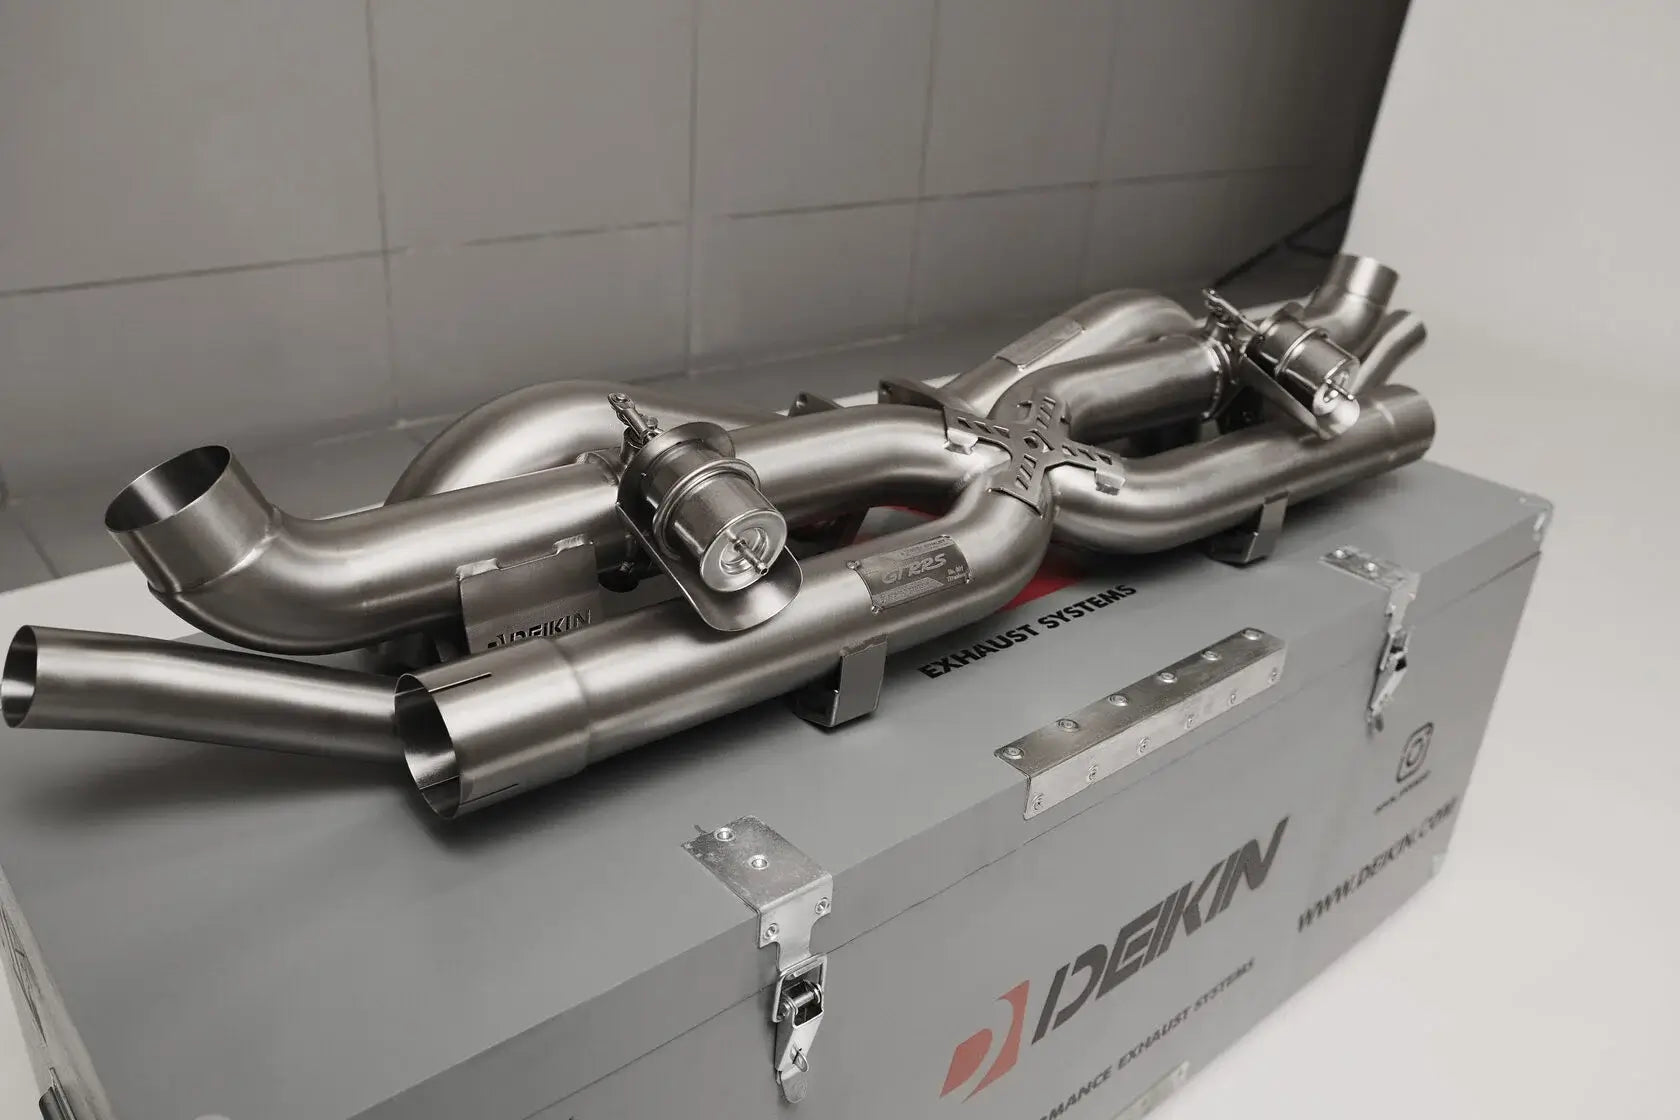 DEIKIN 10-PO.911.T/TS.991.2/R-ES-Ti-00 Exhaust system "Race" Titan for Porsche 911 Turbo/Turbo S (991.2) complete with downpipes without HeatShield Photo-6 